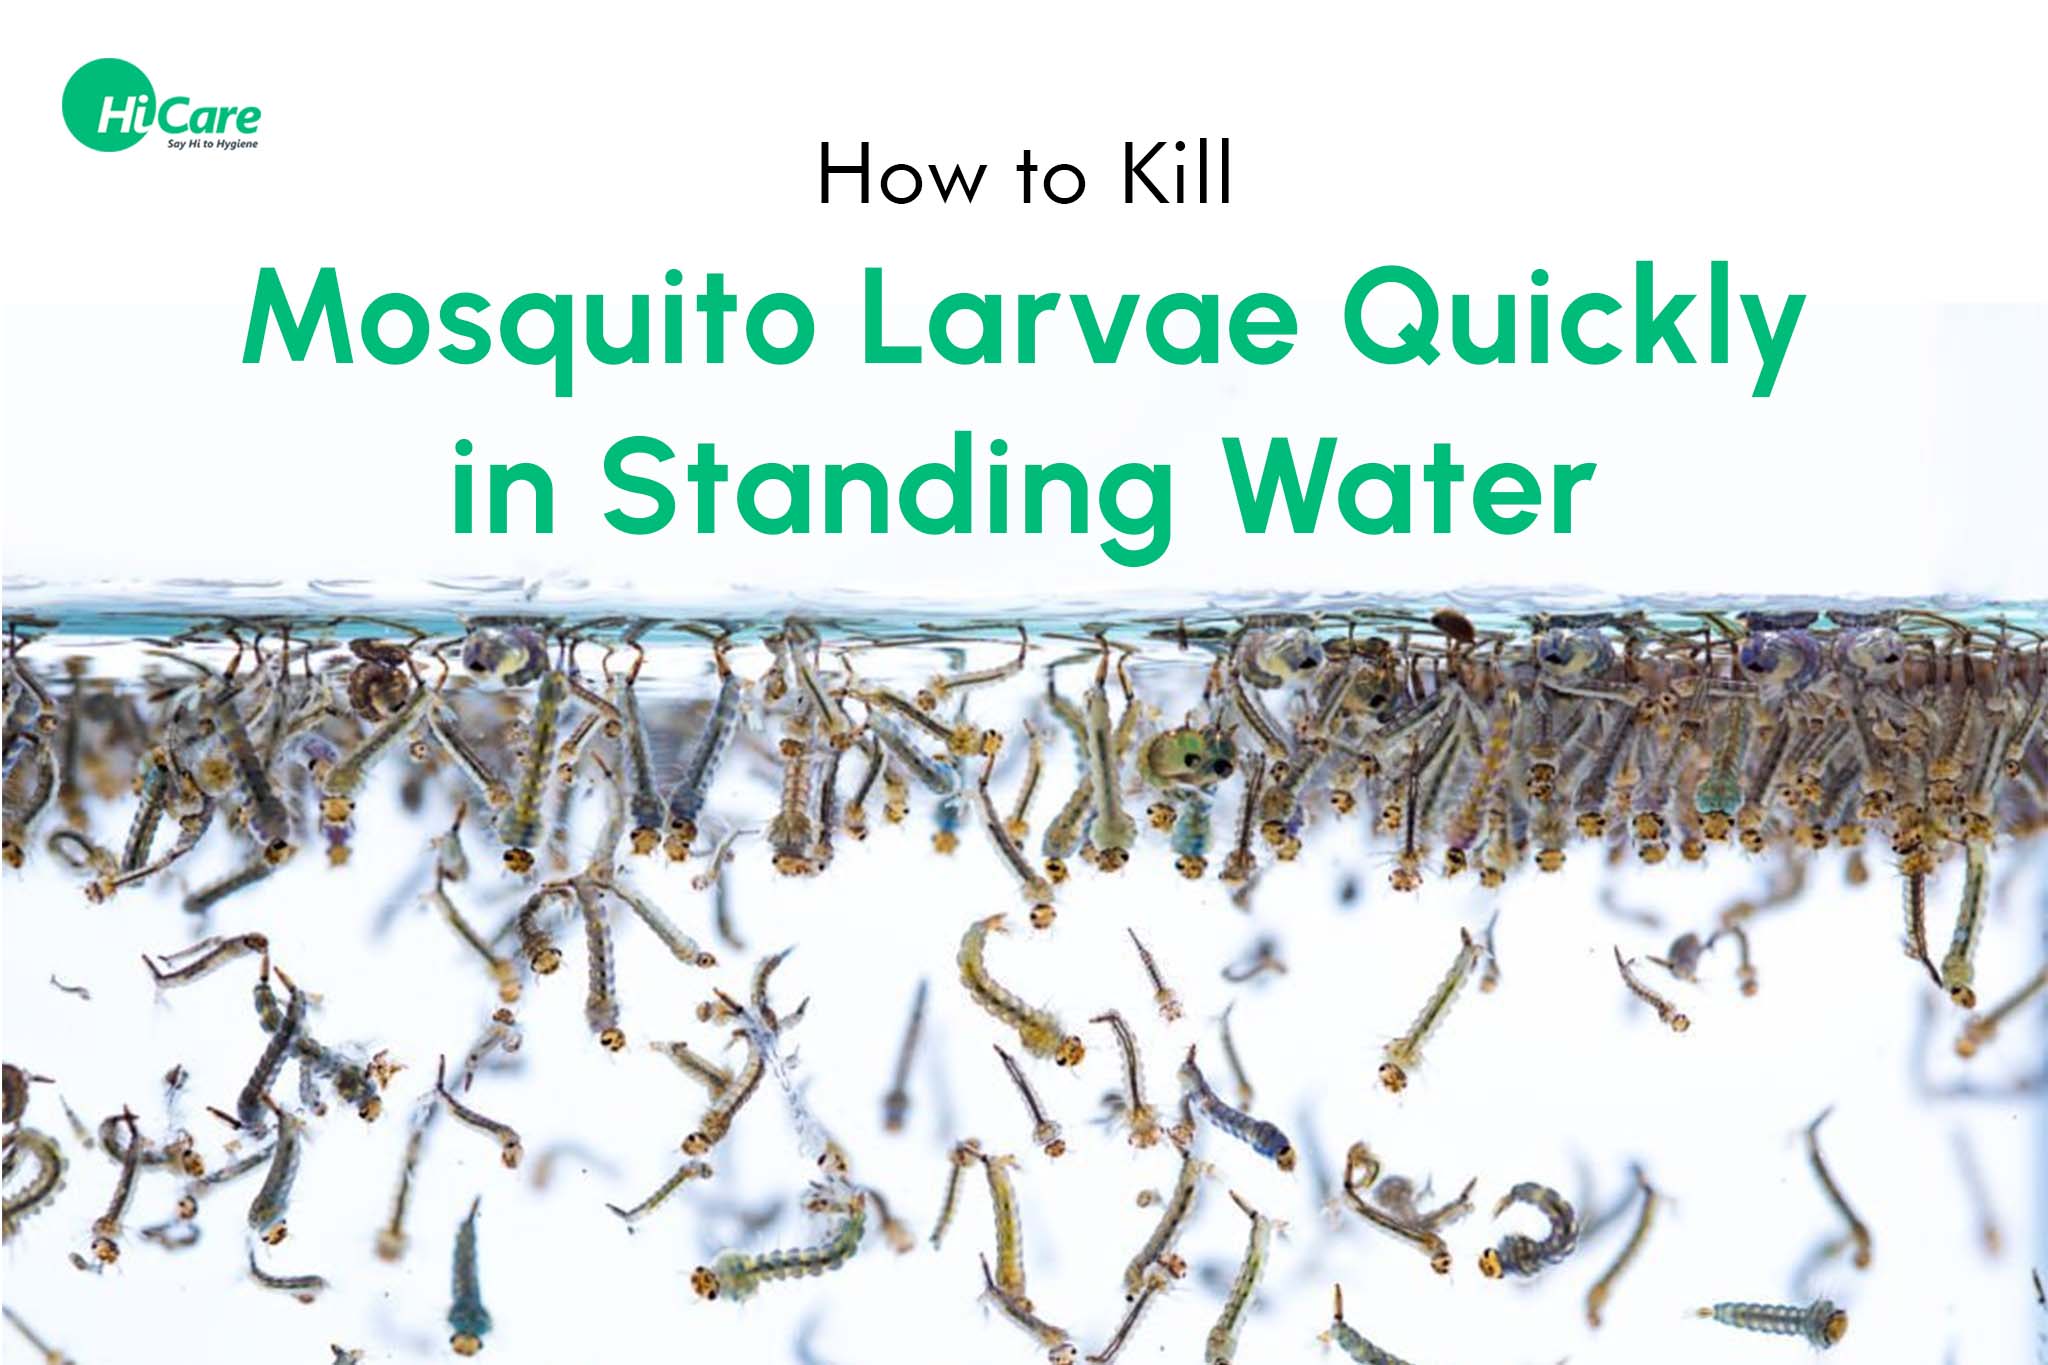 What to Do If You Find Mosquito Larvae?